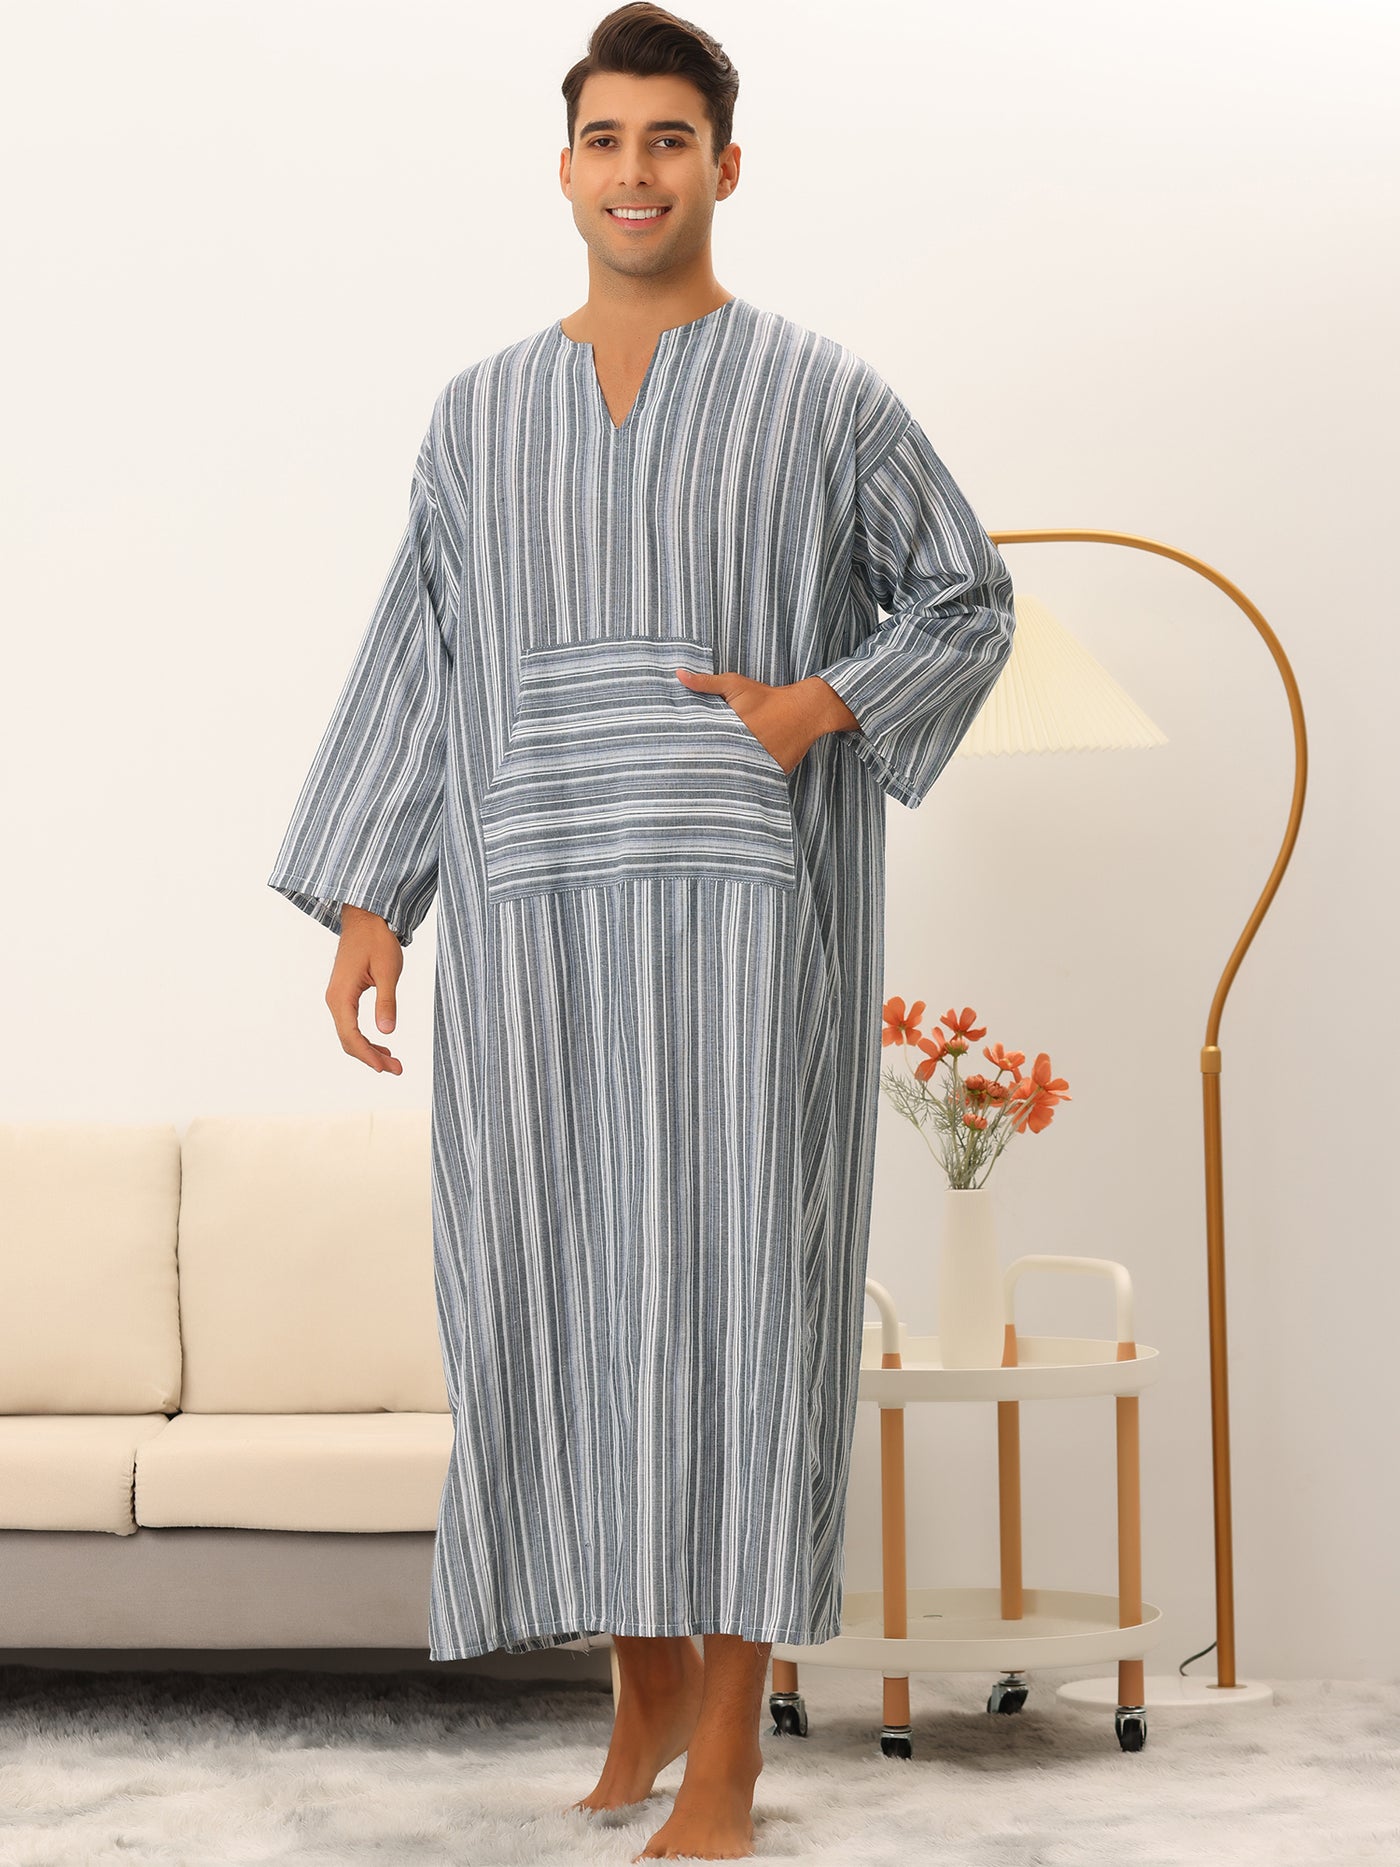 Bublédon Striped Nightshirts for Men's Loose Fit Lightweight Pajamas Long Sleep Gown